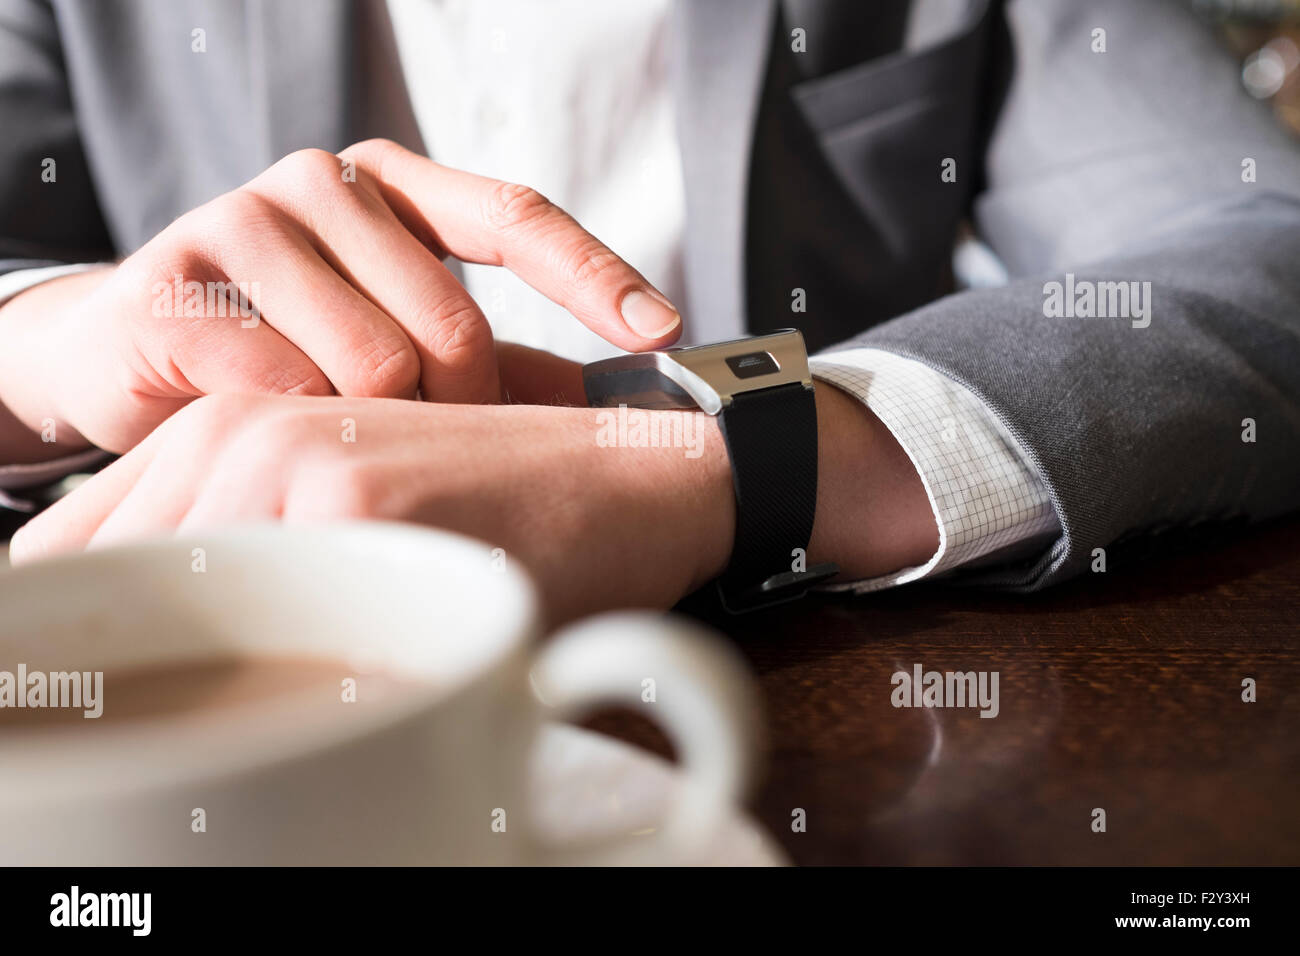 In coffee bar a man using his smartwatch. Close-up hands Stock Photo